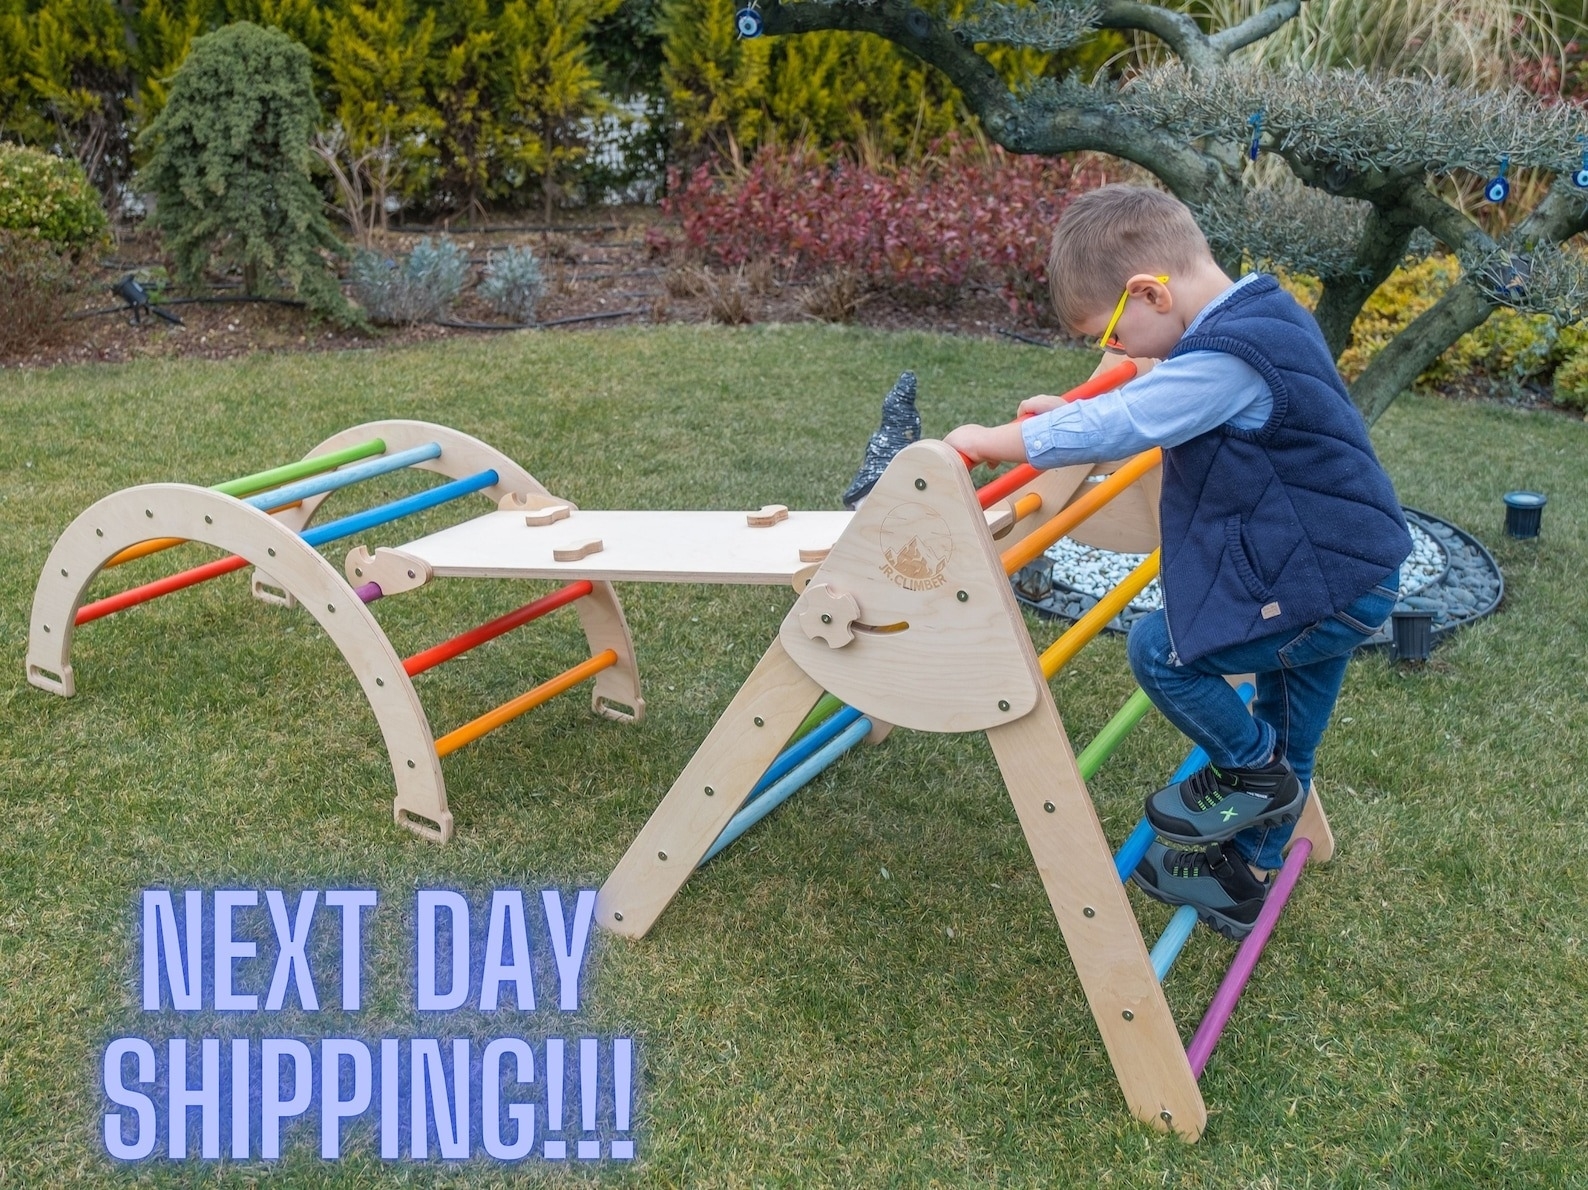 Child playing with two wooden activity ladders with a climbing platform secured between them